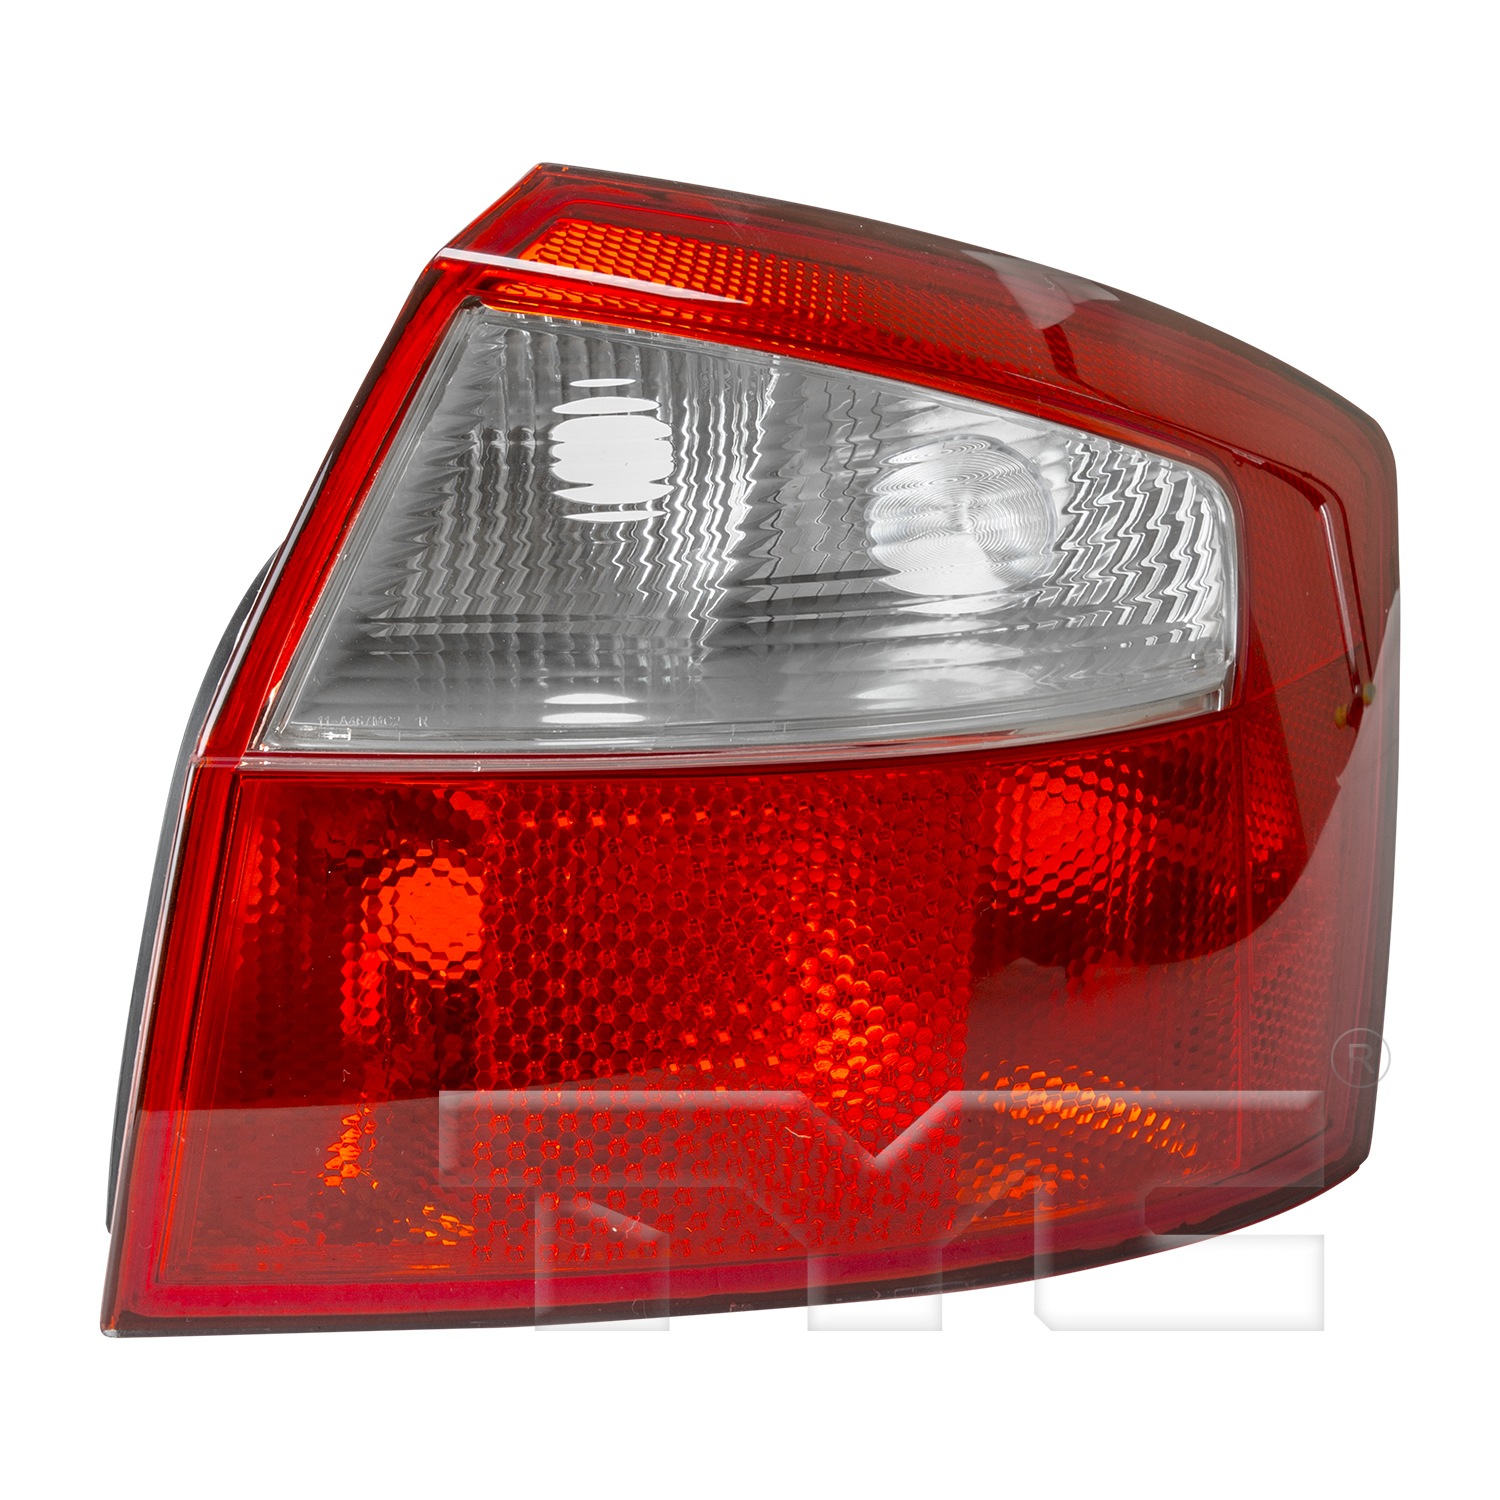 Aftermarket TAILLIGHTS for AUDI - A4, A4,02-05,RT Taillamp lens/housing